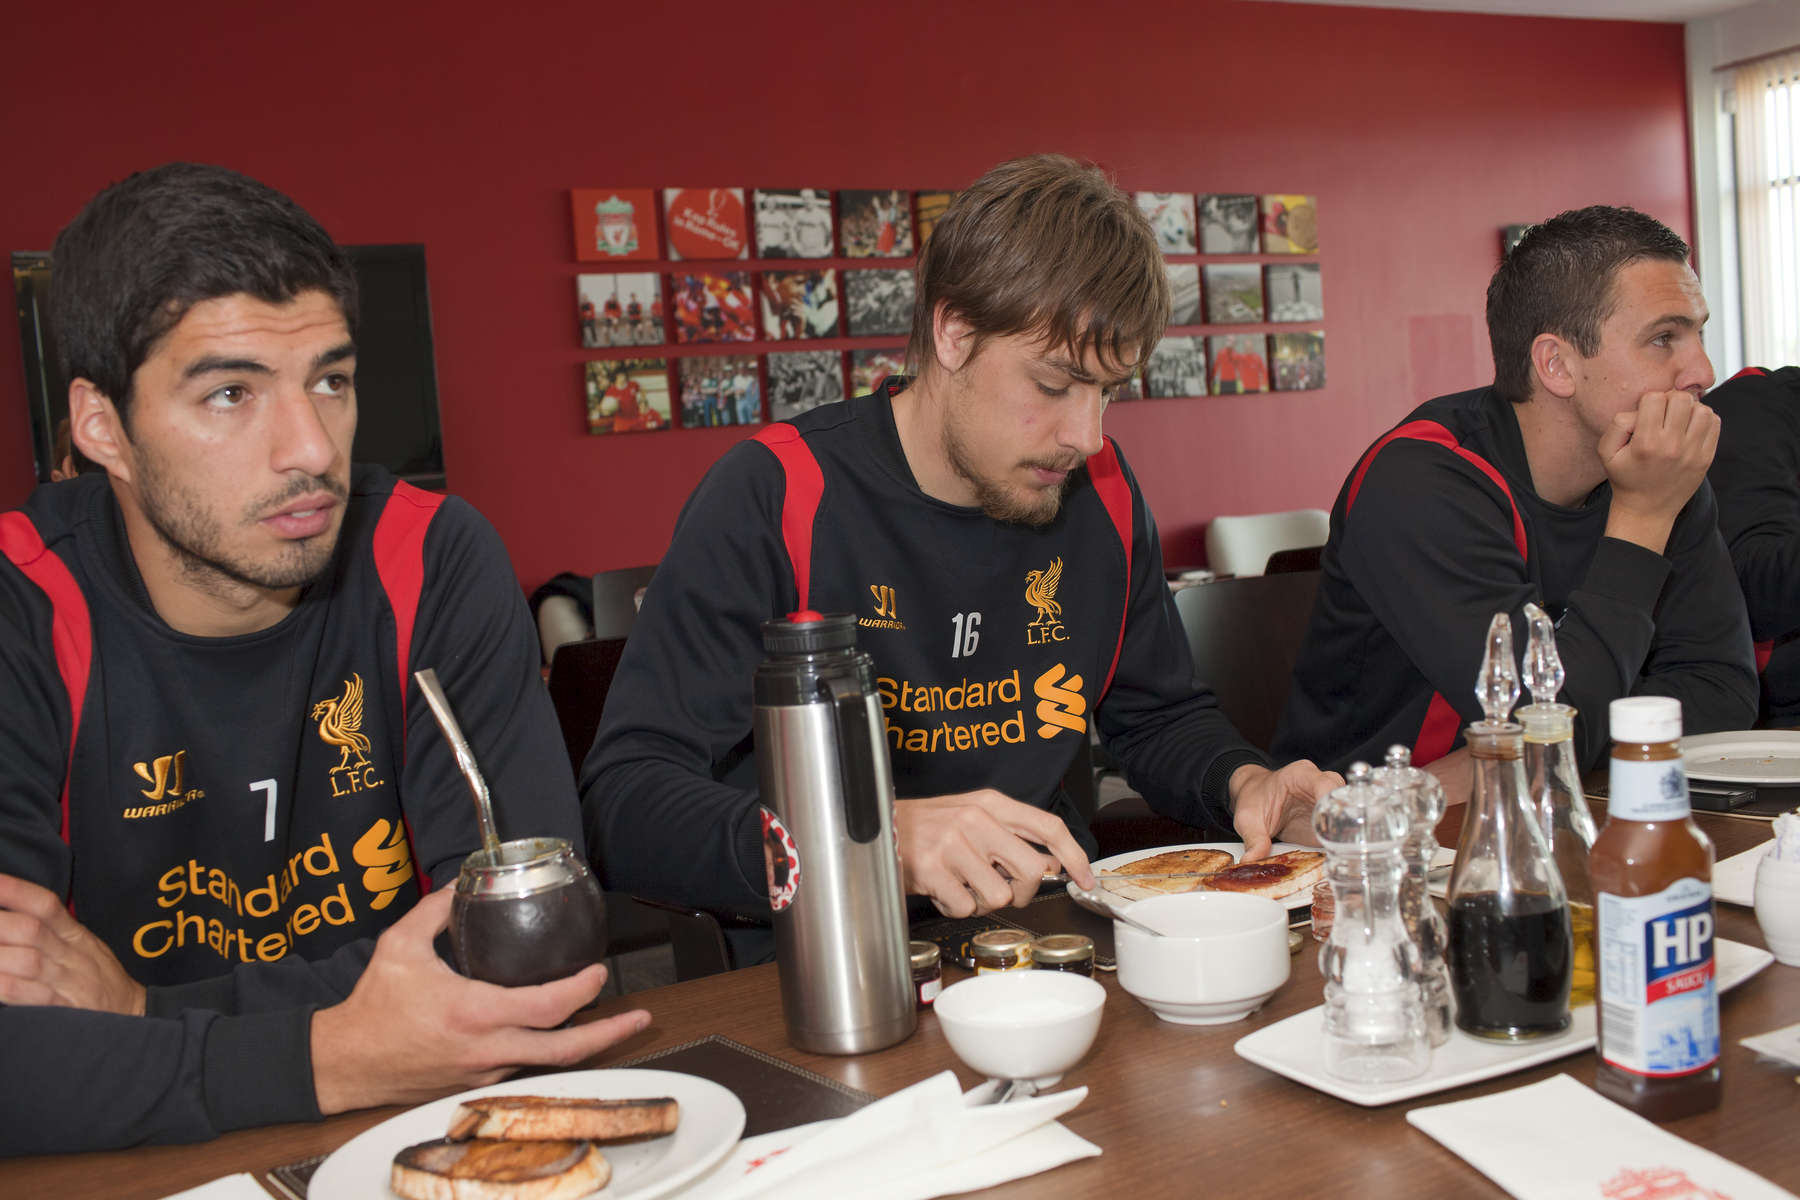 Liverpool FC striker Luis Suarez, Sebastian Coates (and Stuart Downing at breakfast before training at Melwood.Melwood is the Liverpool FC training ground, located in the West Derby area of Liverpool. It is seperate from the Liverpool Academy, which is based in Kirkby.Melwood was redeveloped in the early 2000′s with large input from then-manager Gerard Houllier and now features some of the best facilities in Europe. It has been the club’s training ground since the fifties and was previously transformed into a top class facility by Bill Shankly.Facilities include sythetic pitches, rehabilitation rooms, press and meeting rooms, gymnasium, swimming pool, restaurant and recreational facilities.